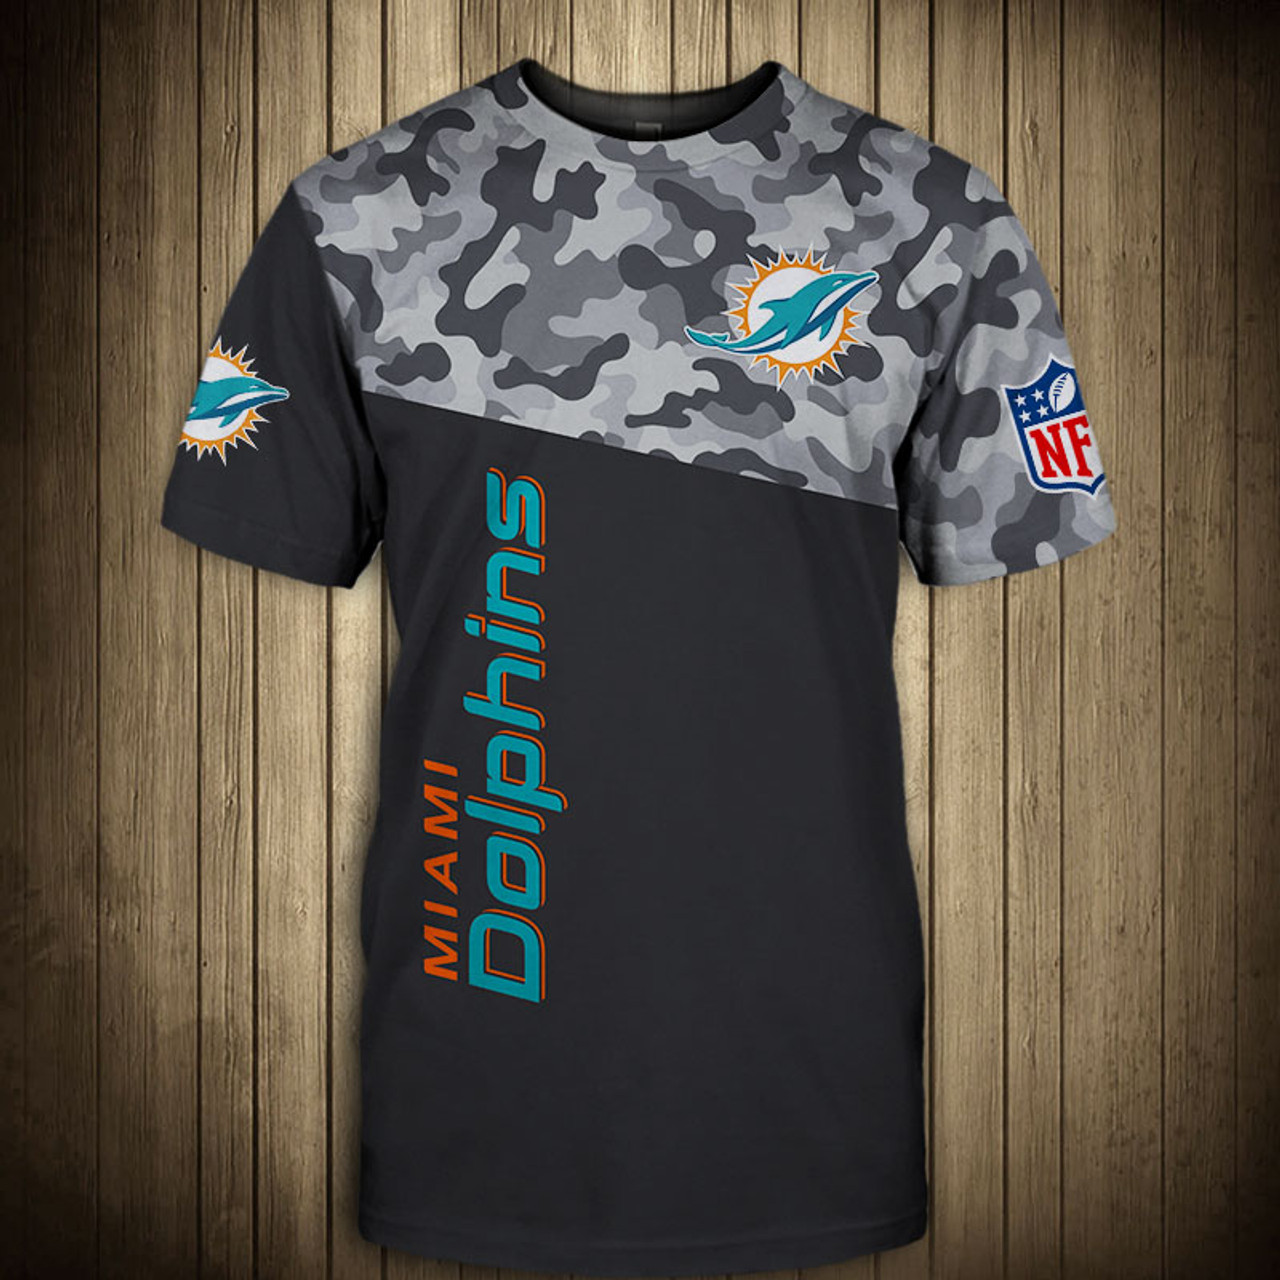 **(OFFICIAL-N.F.L.MIAMI-DOLPHINS-CAMO.DESIGN-TEAM-TEES/CUSTOM-3D-DOLPHINS-OFFICIAL-LOGOS & OFFICIAL-DOLPHINS-TEAM-COLORS/DETAILED-3D-GRAPHIC-PRINTED-DOUBLE-SIDED/ALL-OVER-FRONT & BACK-GRAPHIC-PRINTED-DESIGN/PREMIUM-N.F.L.DOLPHINS-CAMO.TEAM-TEES)**